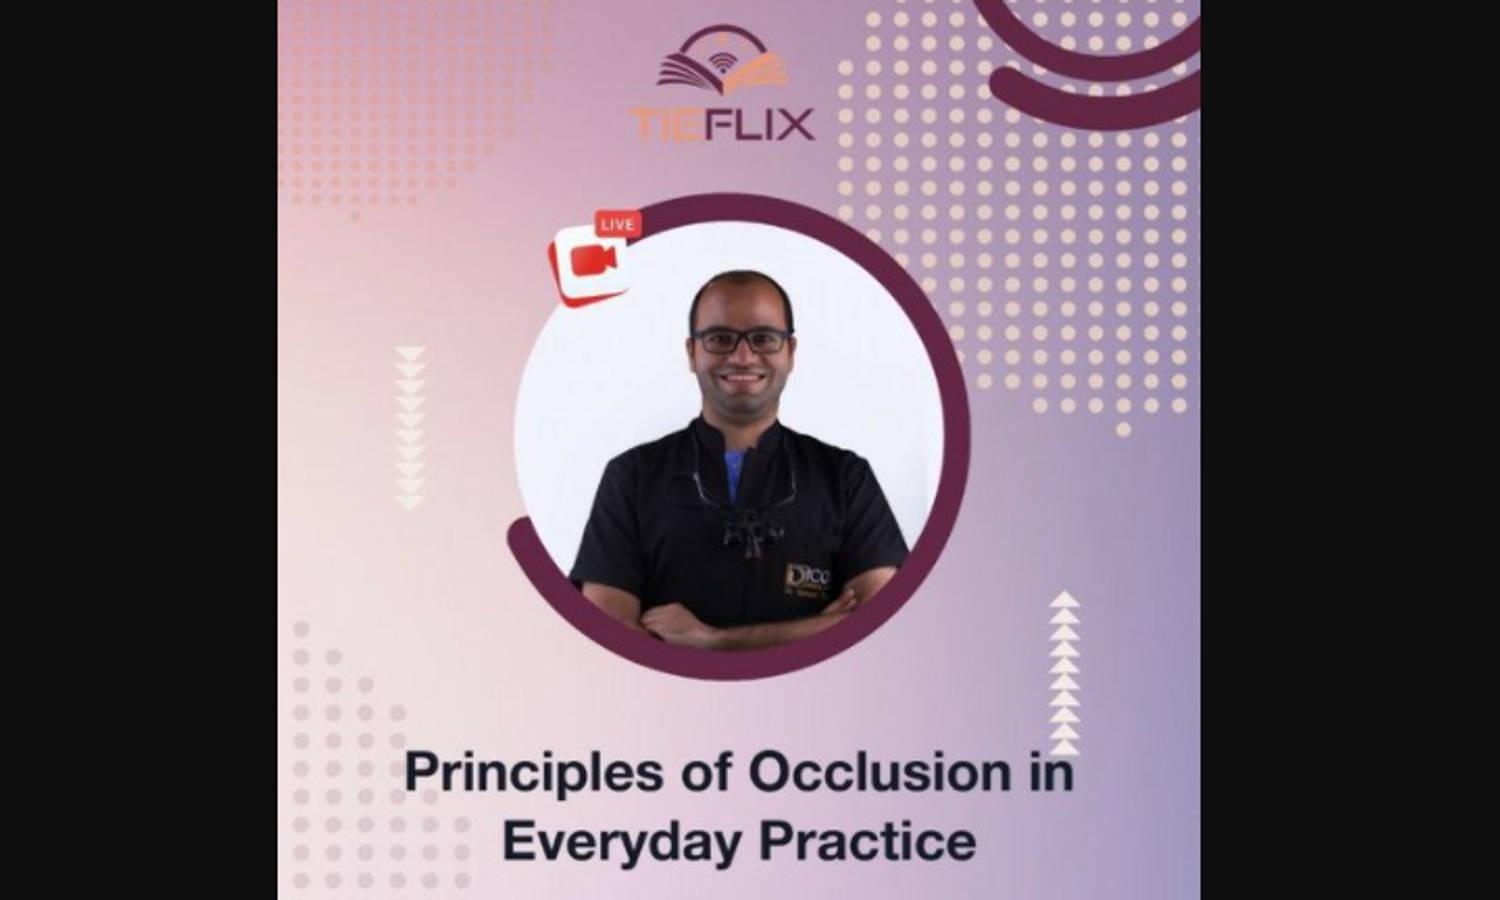 Principles of Occlusion in Everyday Practice – Live